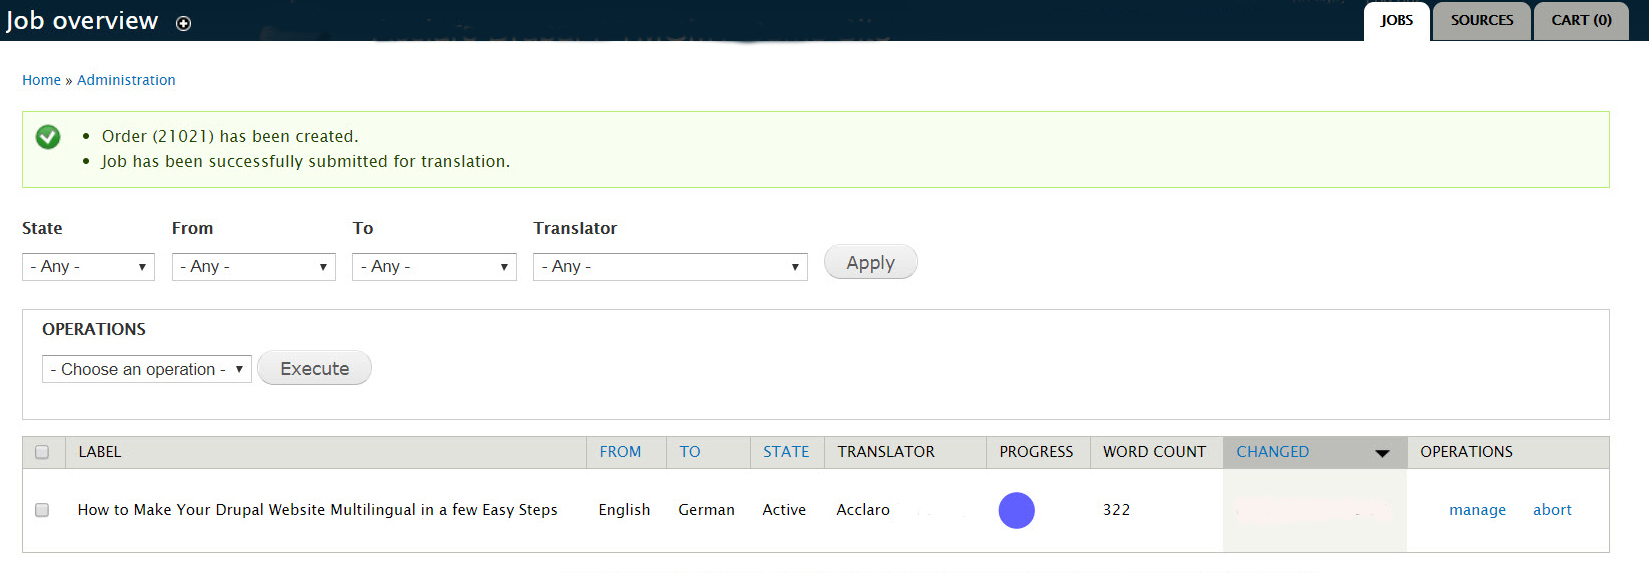 How to Build a Multilingual Drupal Website - Review Your Translation Order